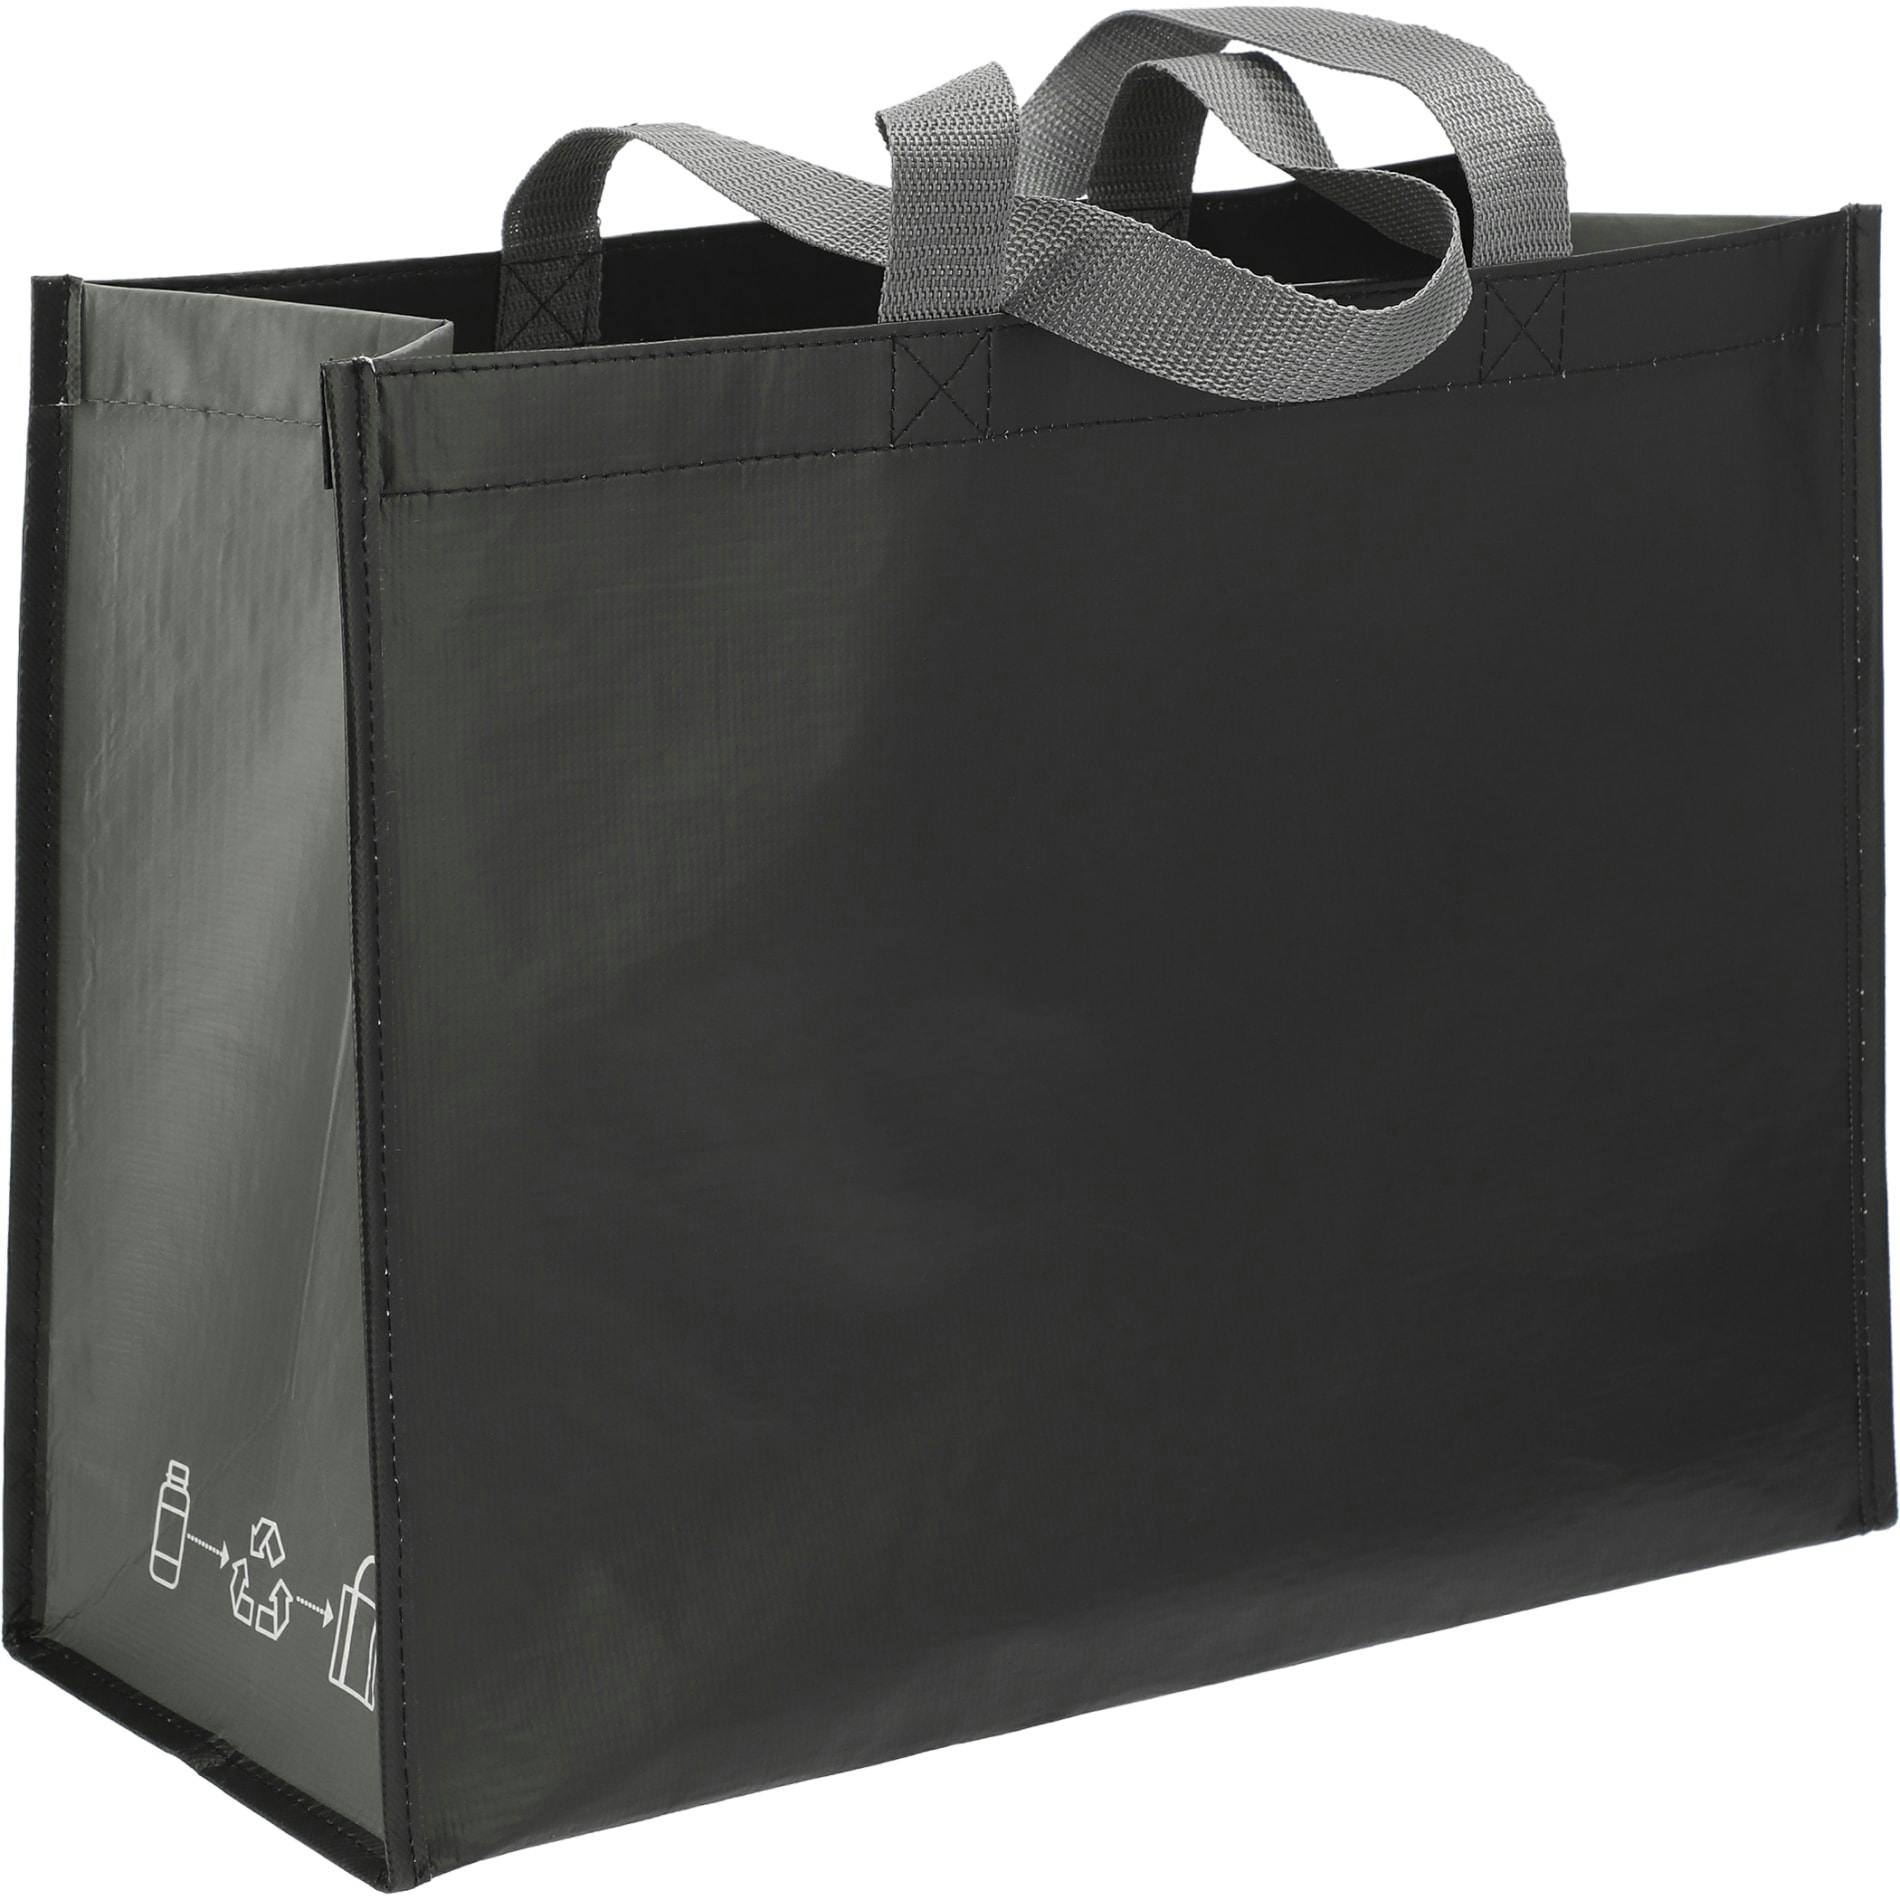 RPET Laminated Matte Shopper Tote - additional Image 3